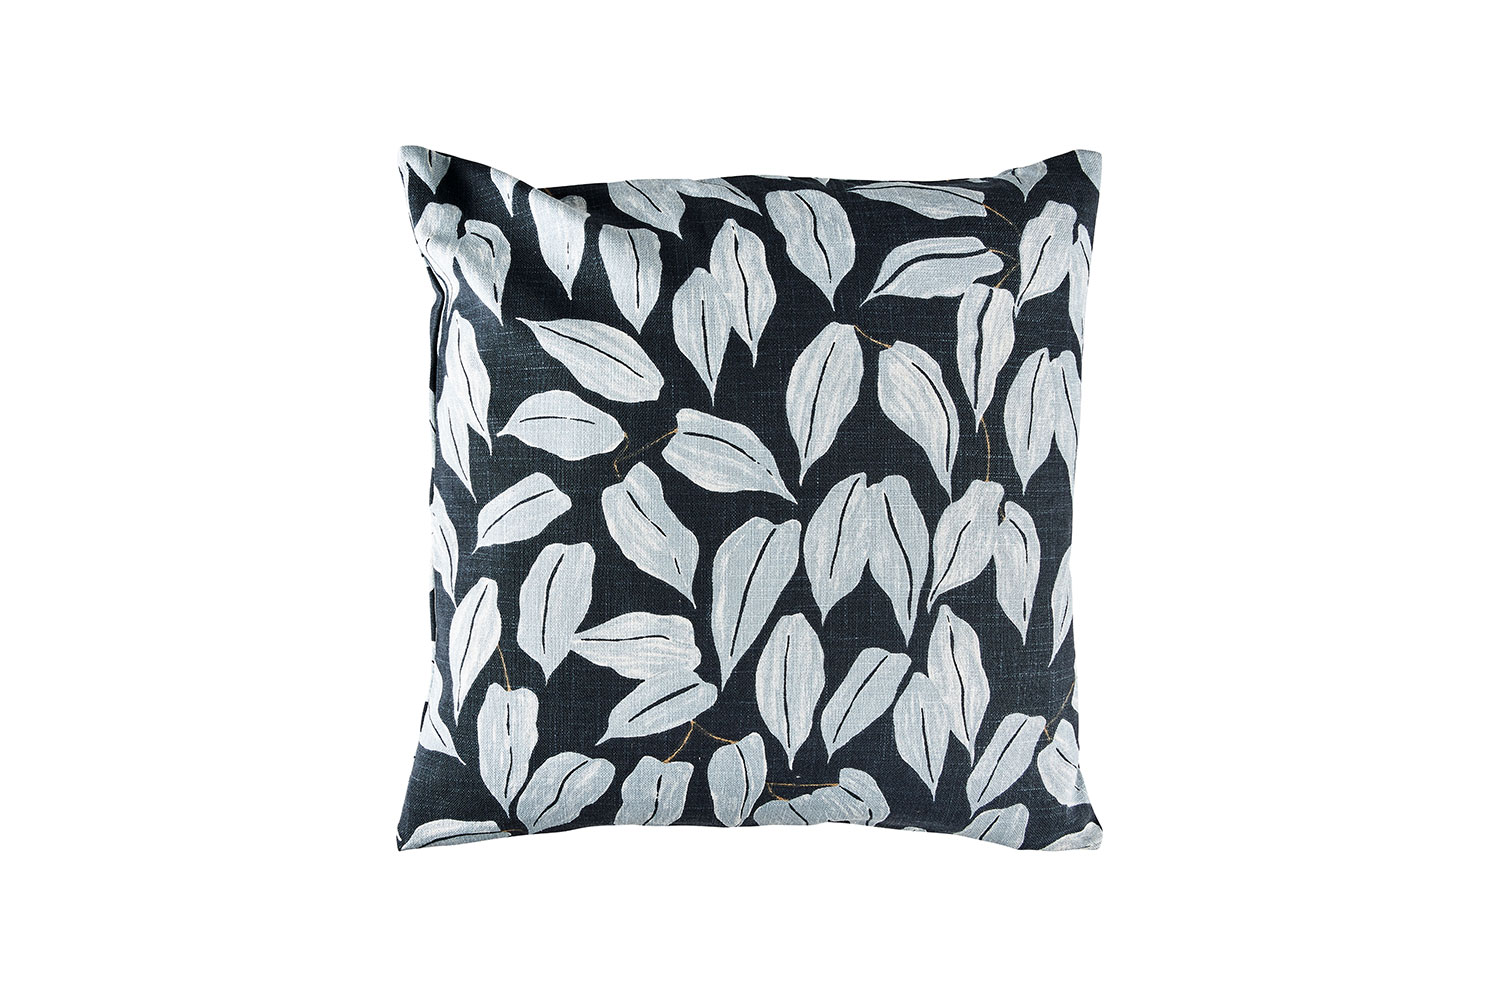 Patterned Cotton Cushion